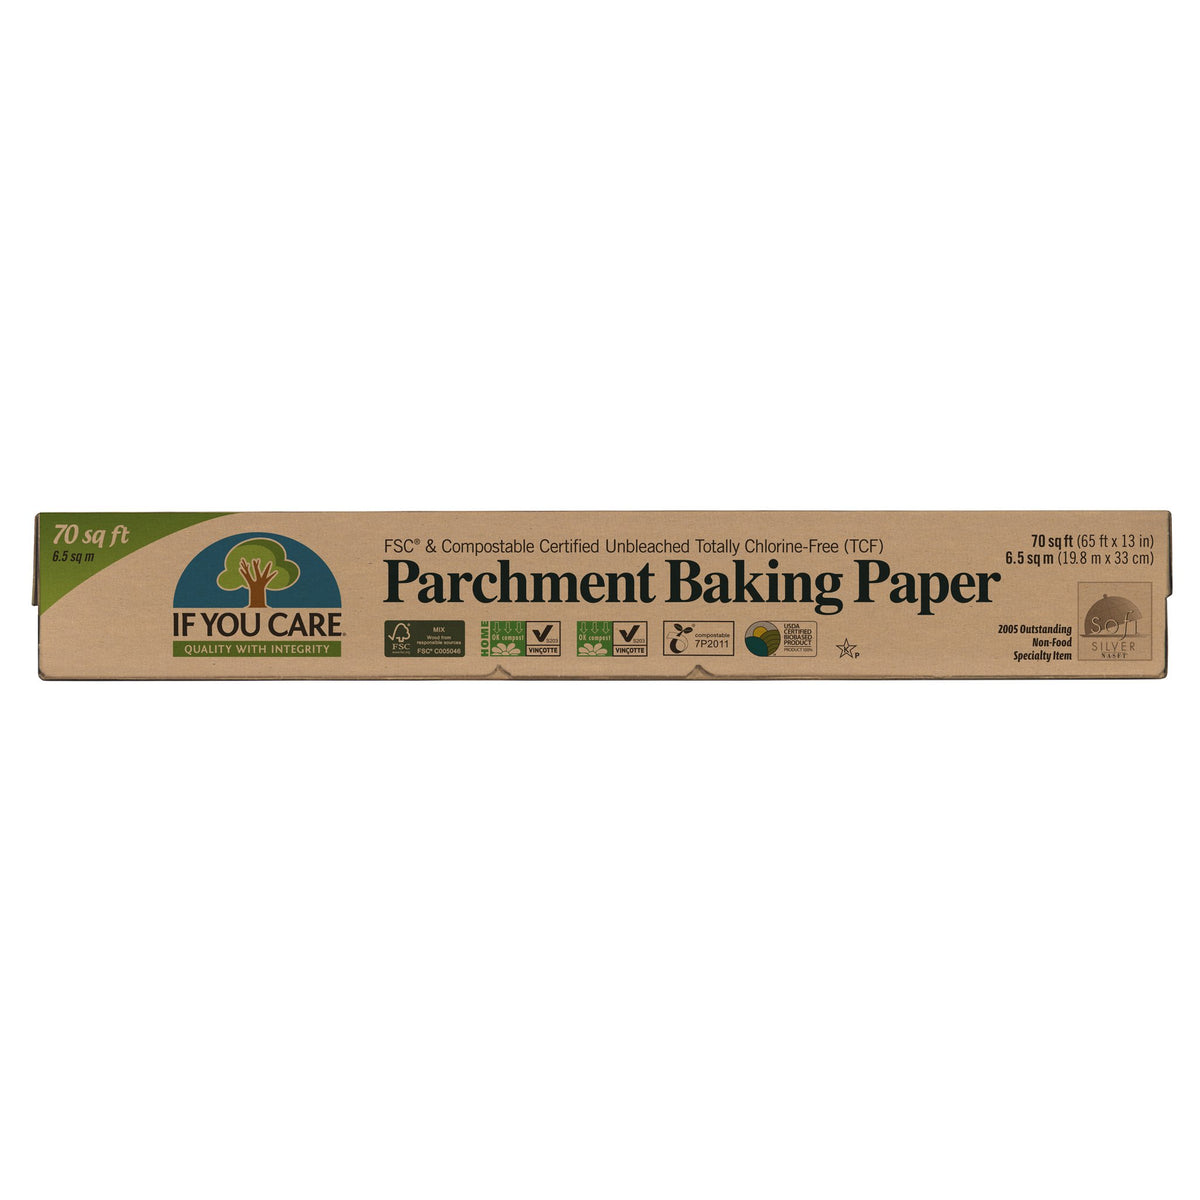 parchment baking paper package. roll contains 70 squarefeet